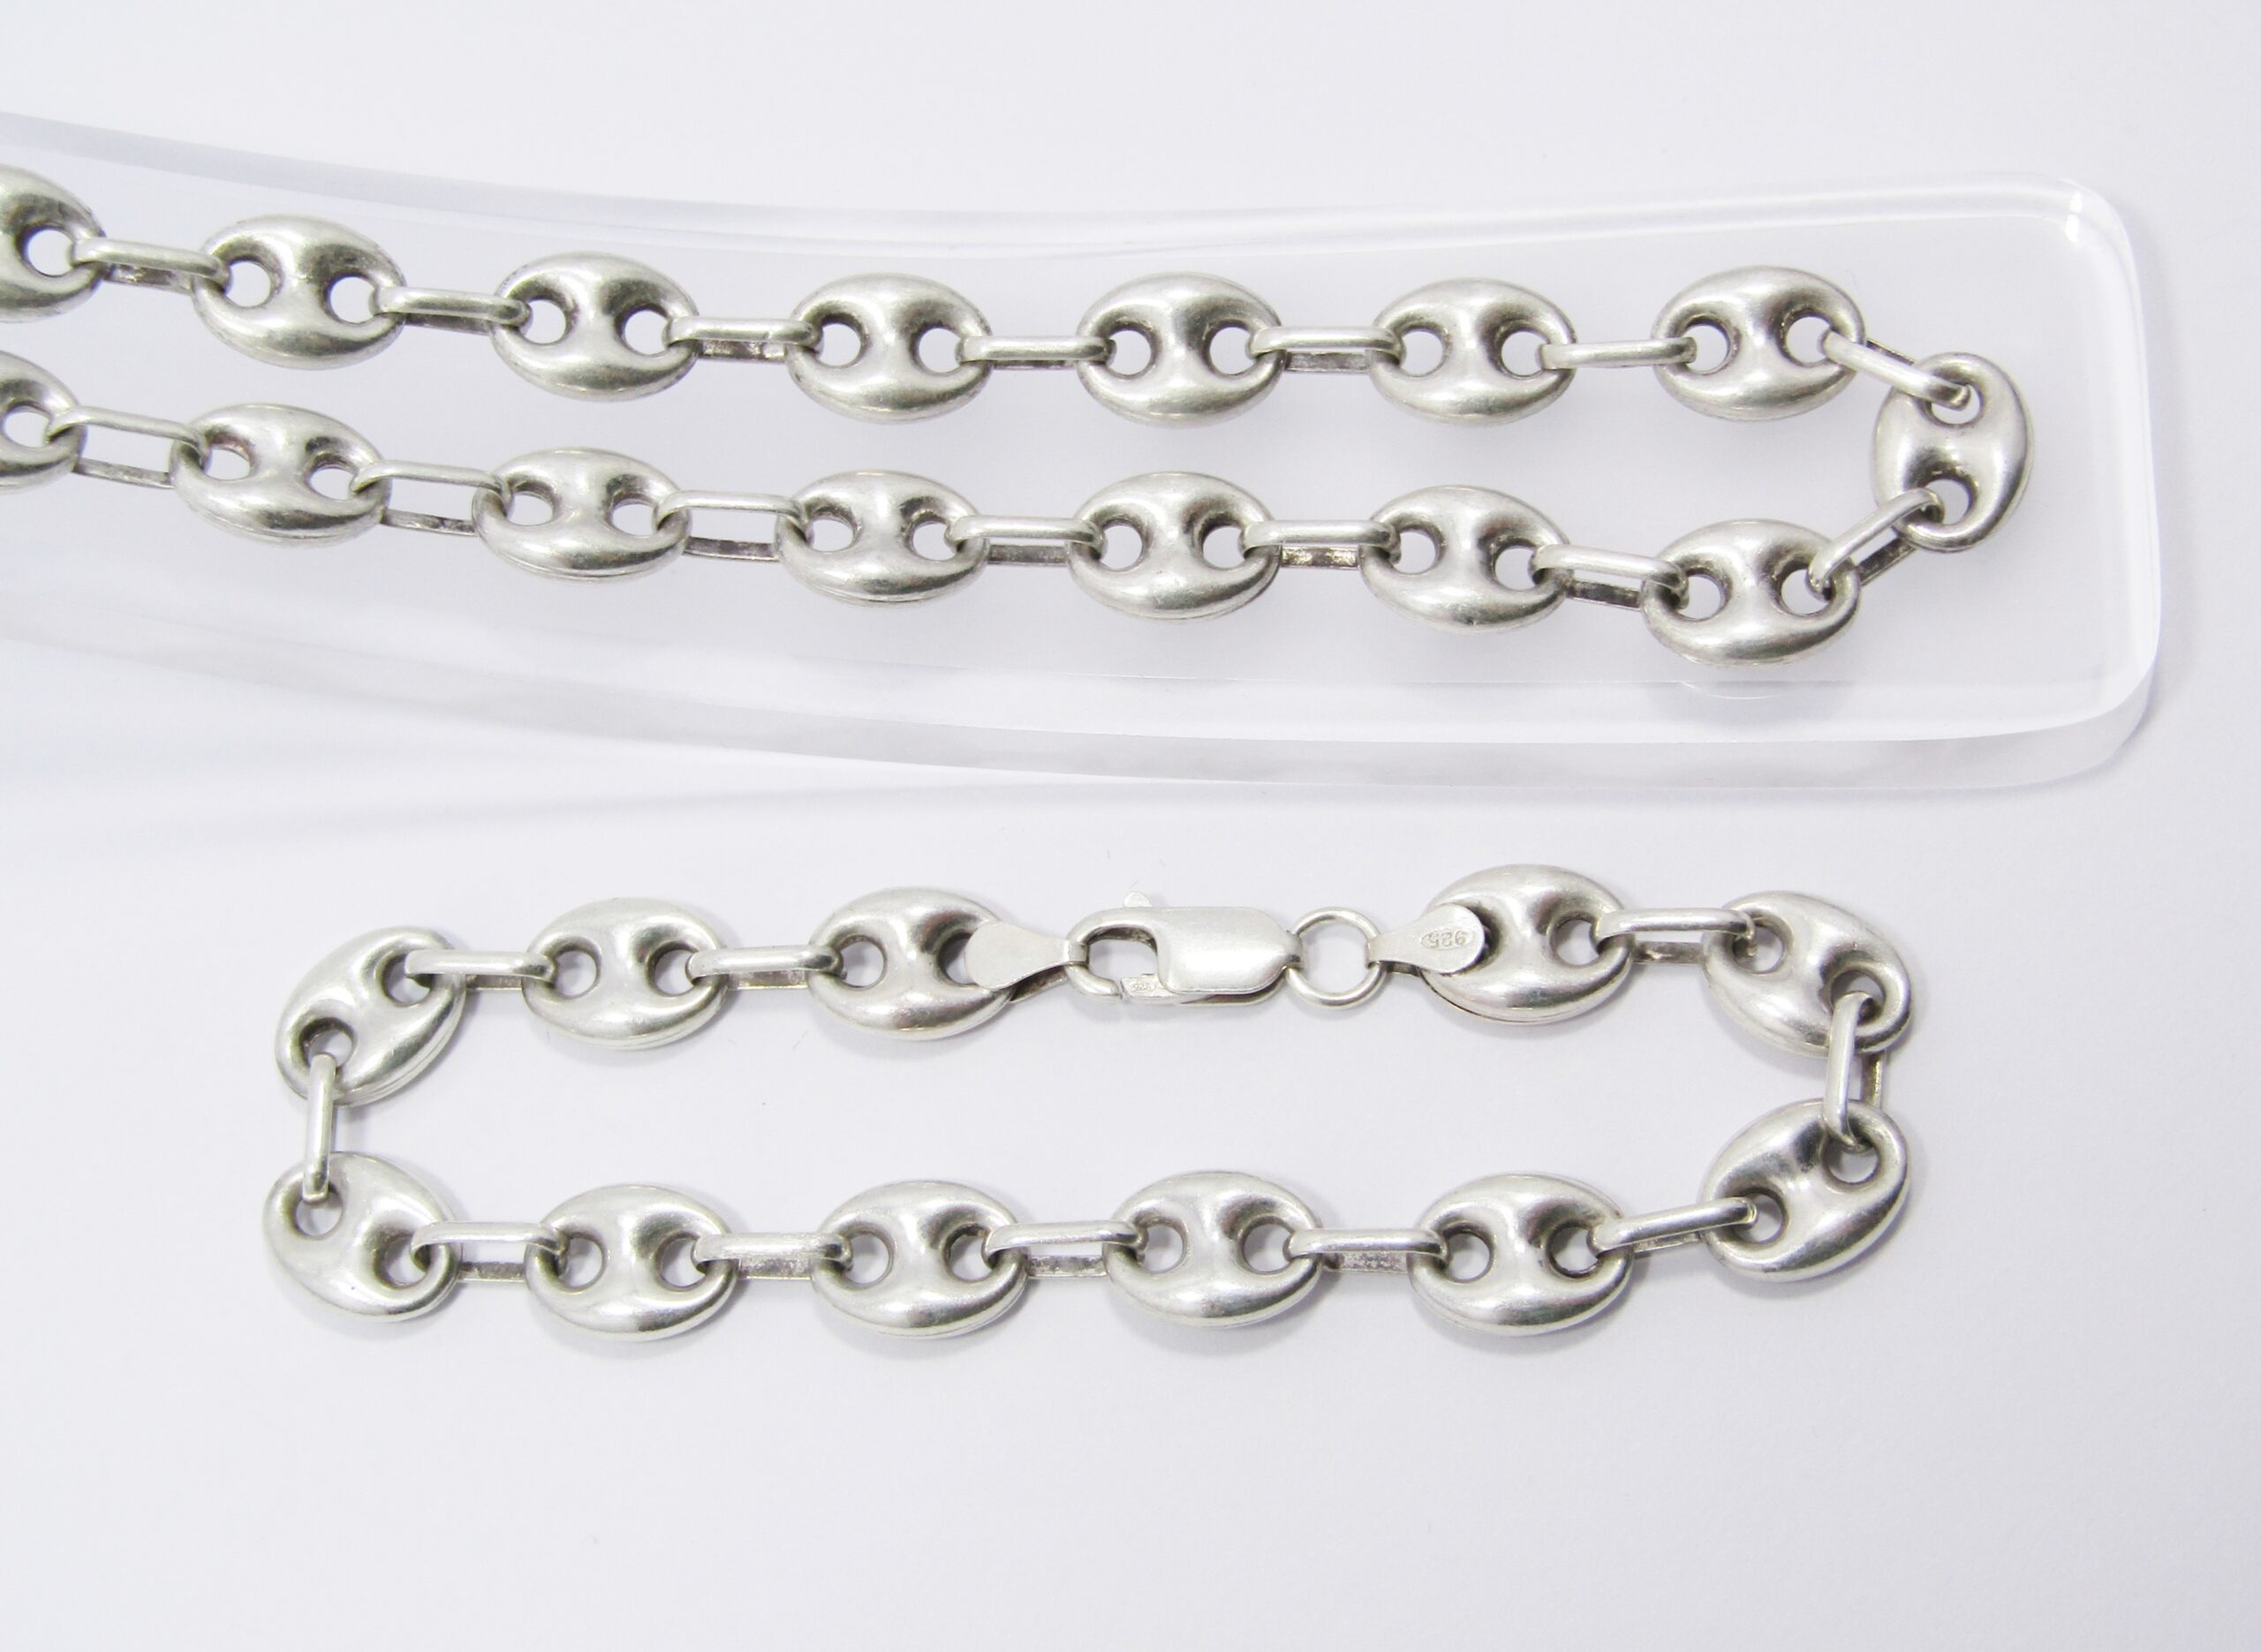 A Gorgeous Chunky Gucci Link Necklace And Bracelet Set in Sterling Silver.